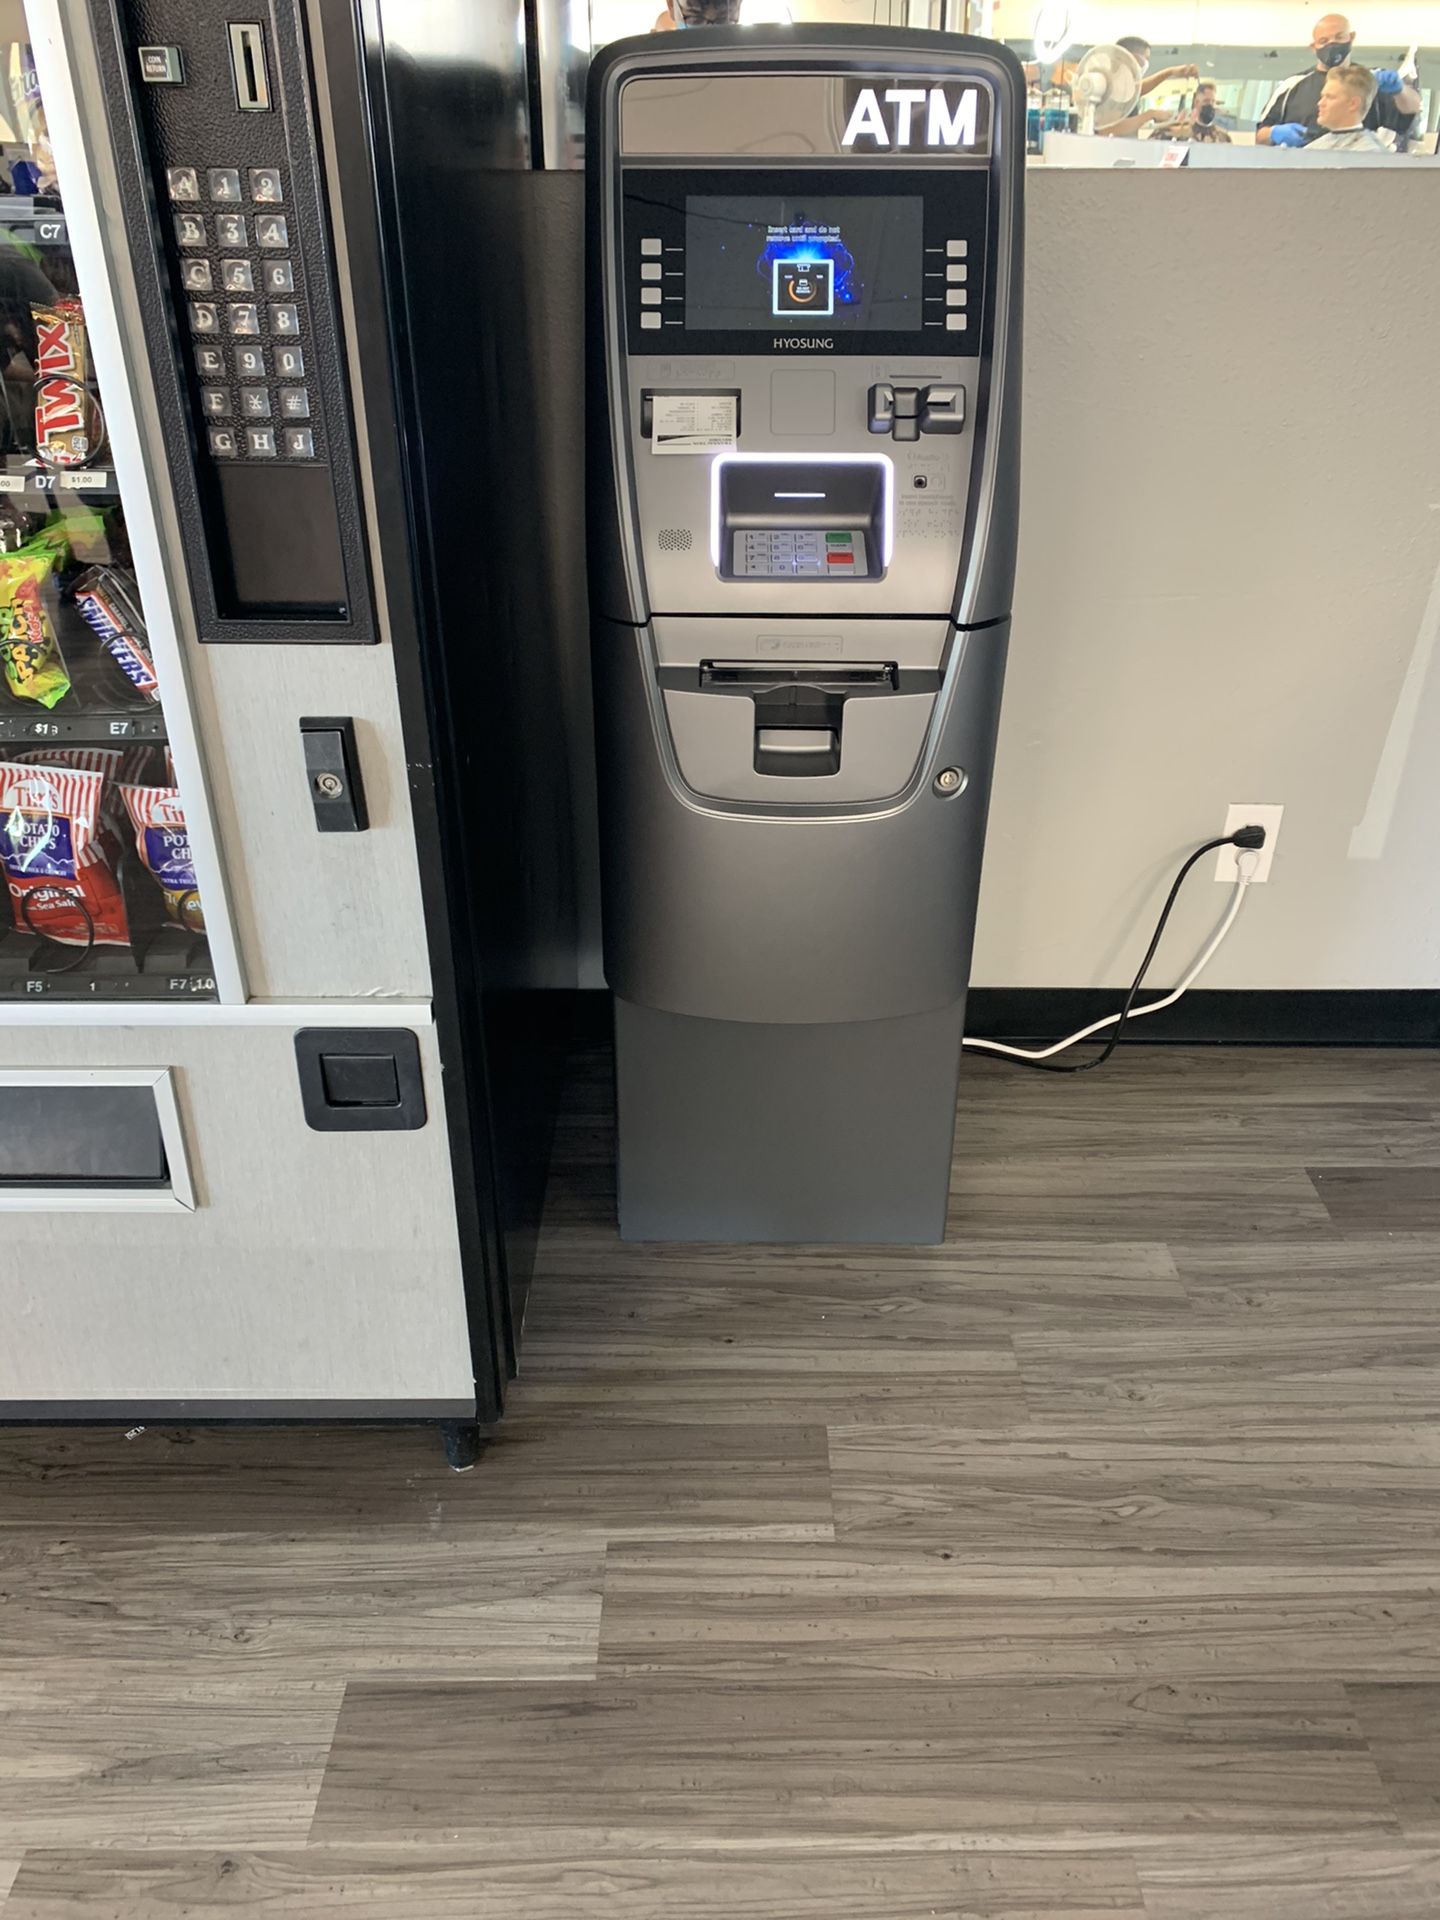 Free ATM placement at your business